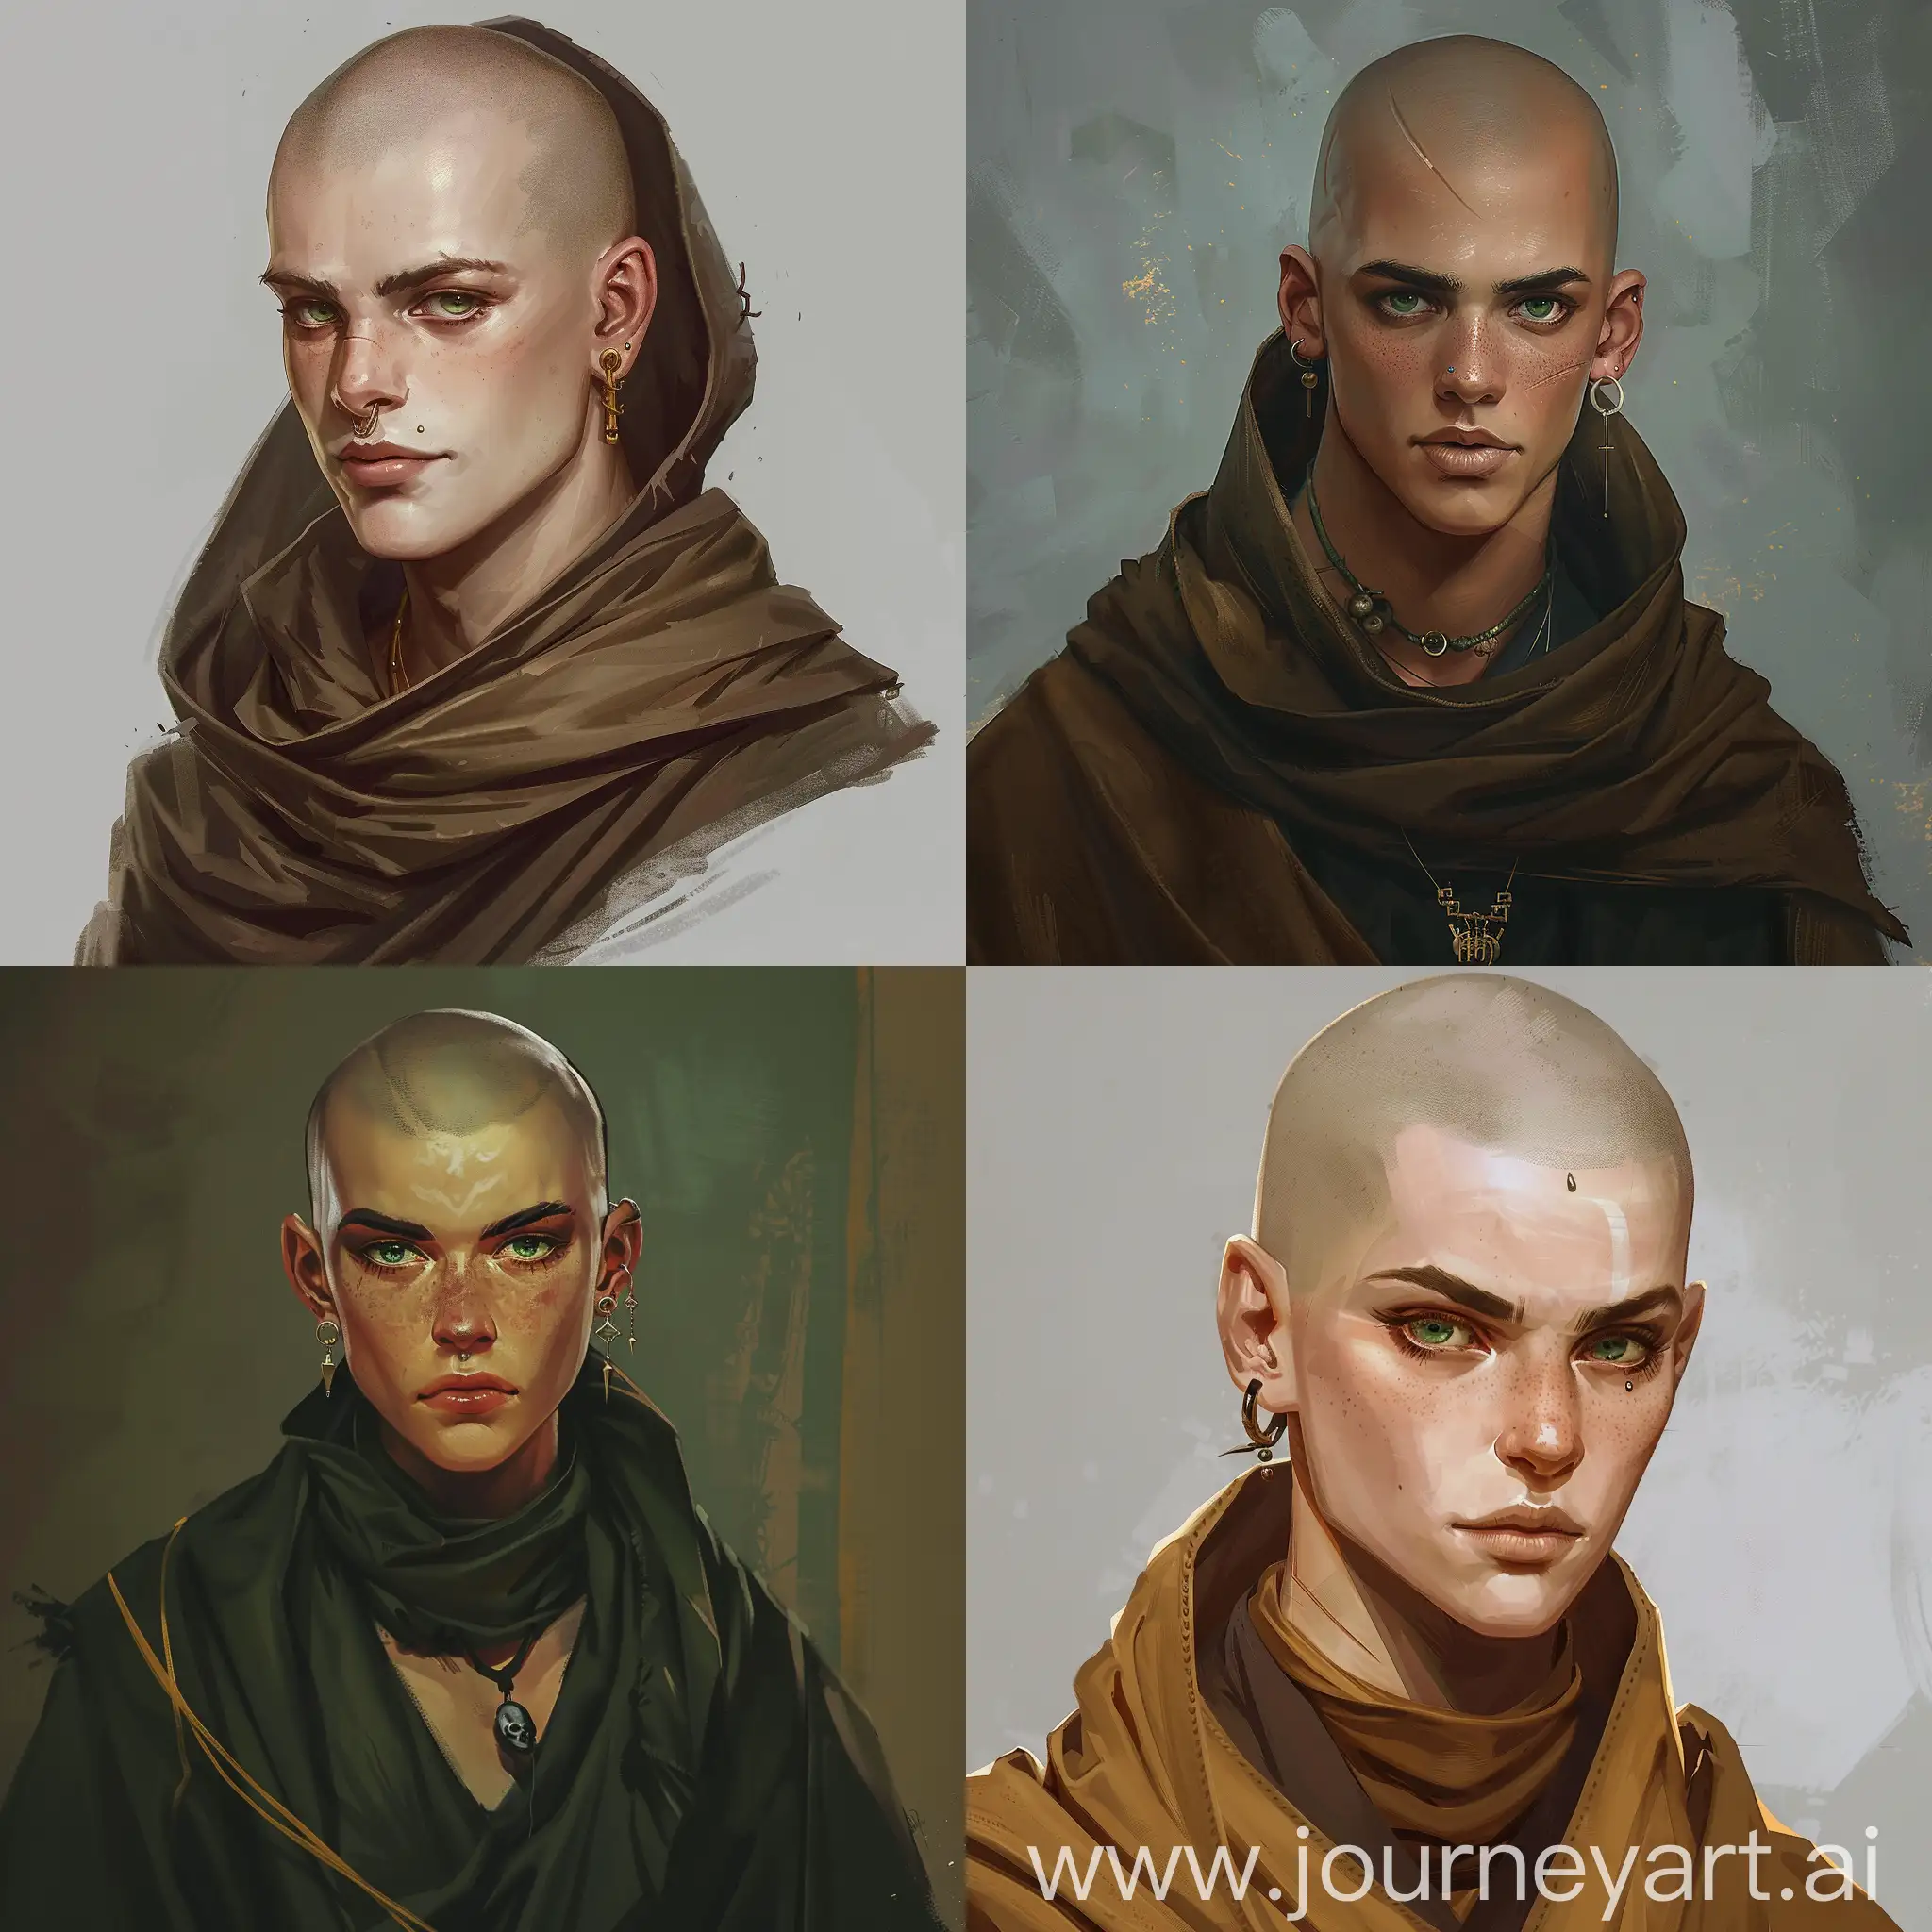 Male monk dnd.bald and shaved.He has good facial structure and staring.He has earrings and piercings on his left ear.He has green eyes and wearing a monk rob